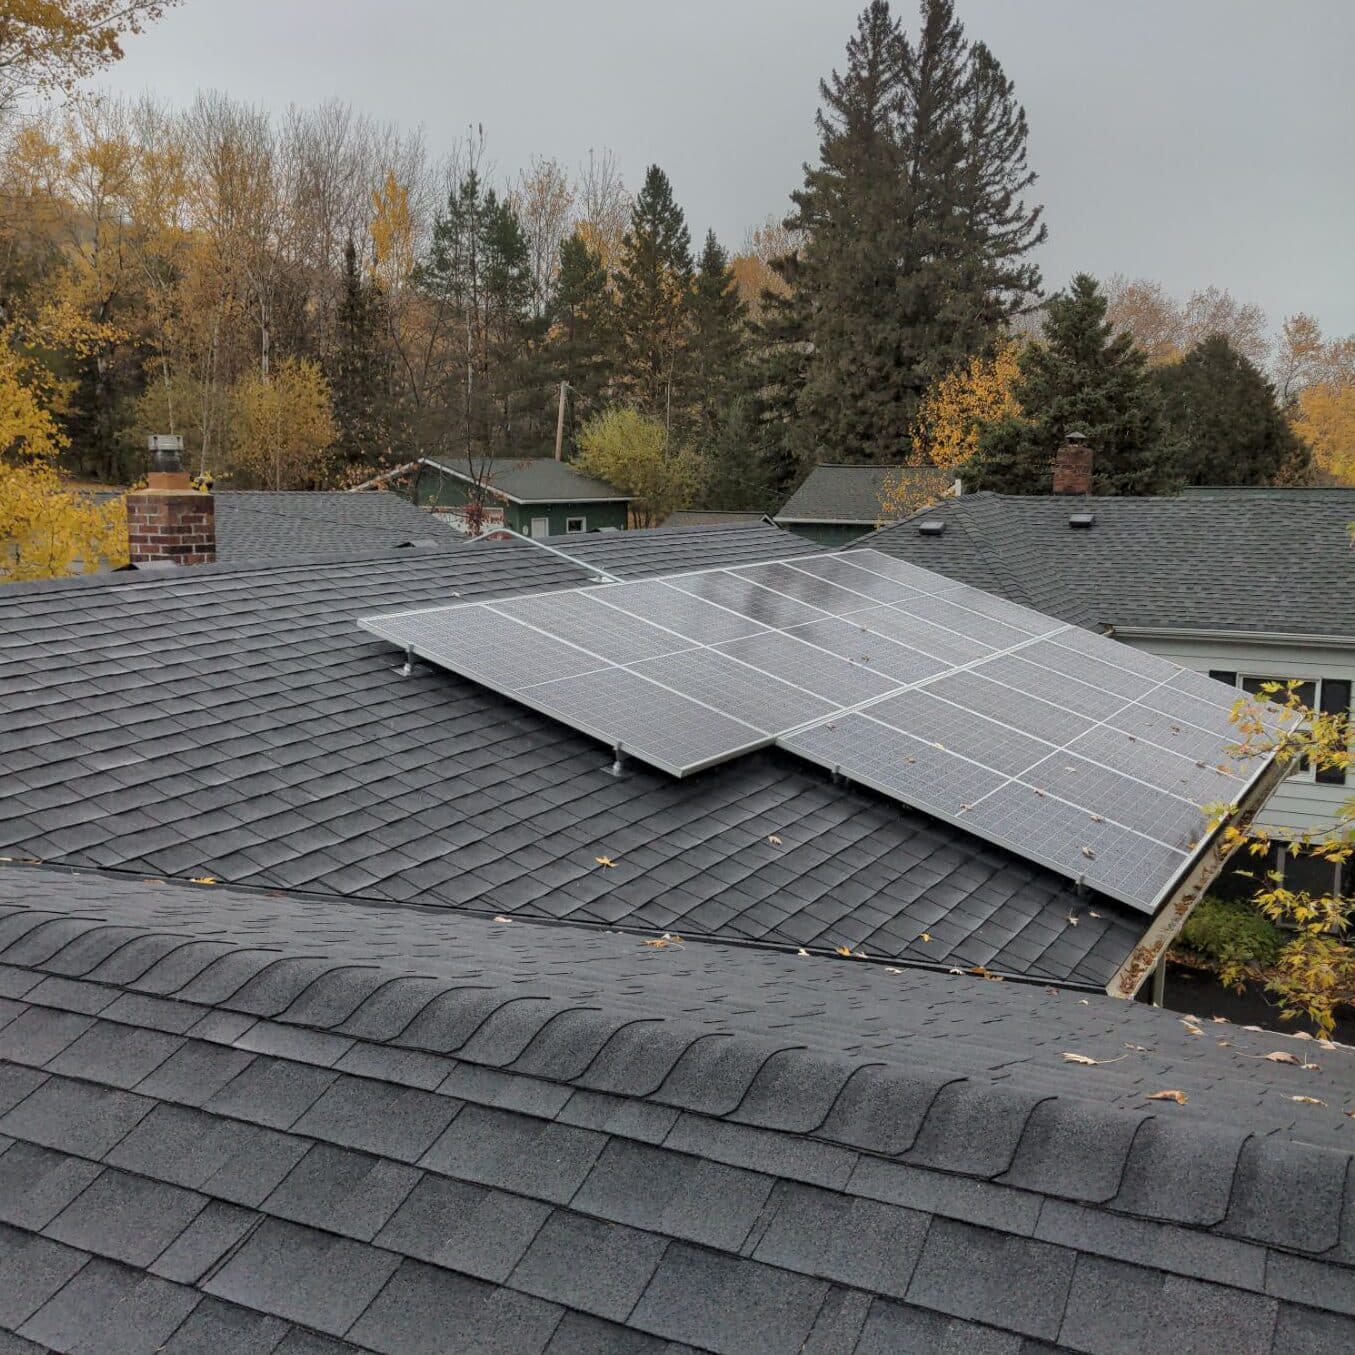 Solar energy panels on roof of house - it is initially a financial benefit to have a roof-mounted solar array